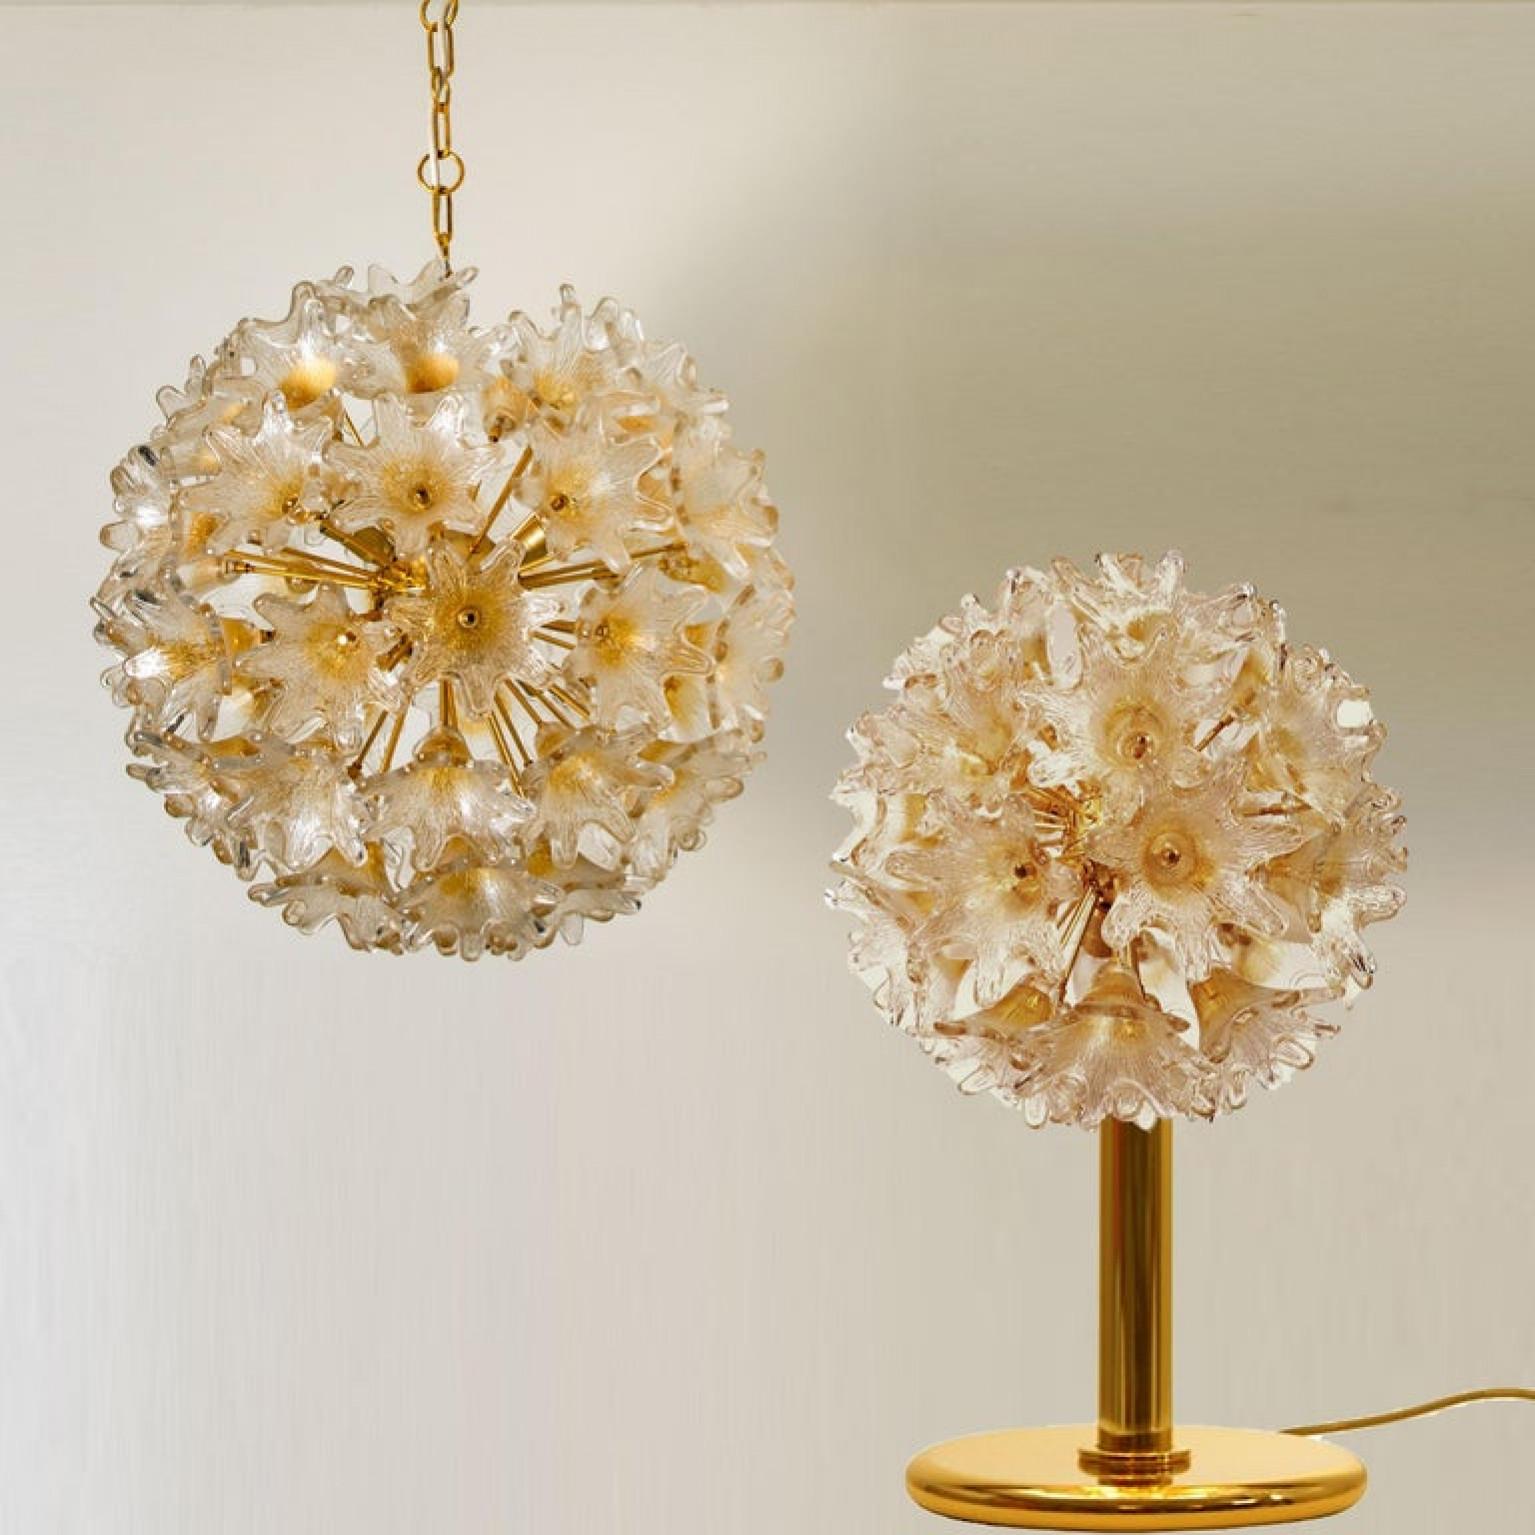 Pair of Brass Gold Murano Glass Sputnik Light Fixtures by Paolo Venini for VeArt For Sale 3